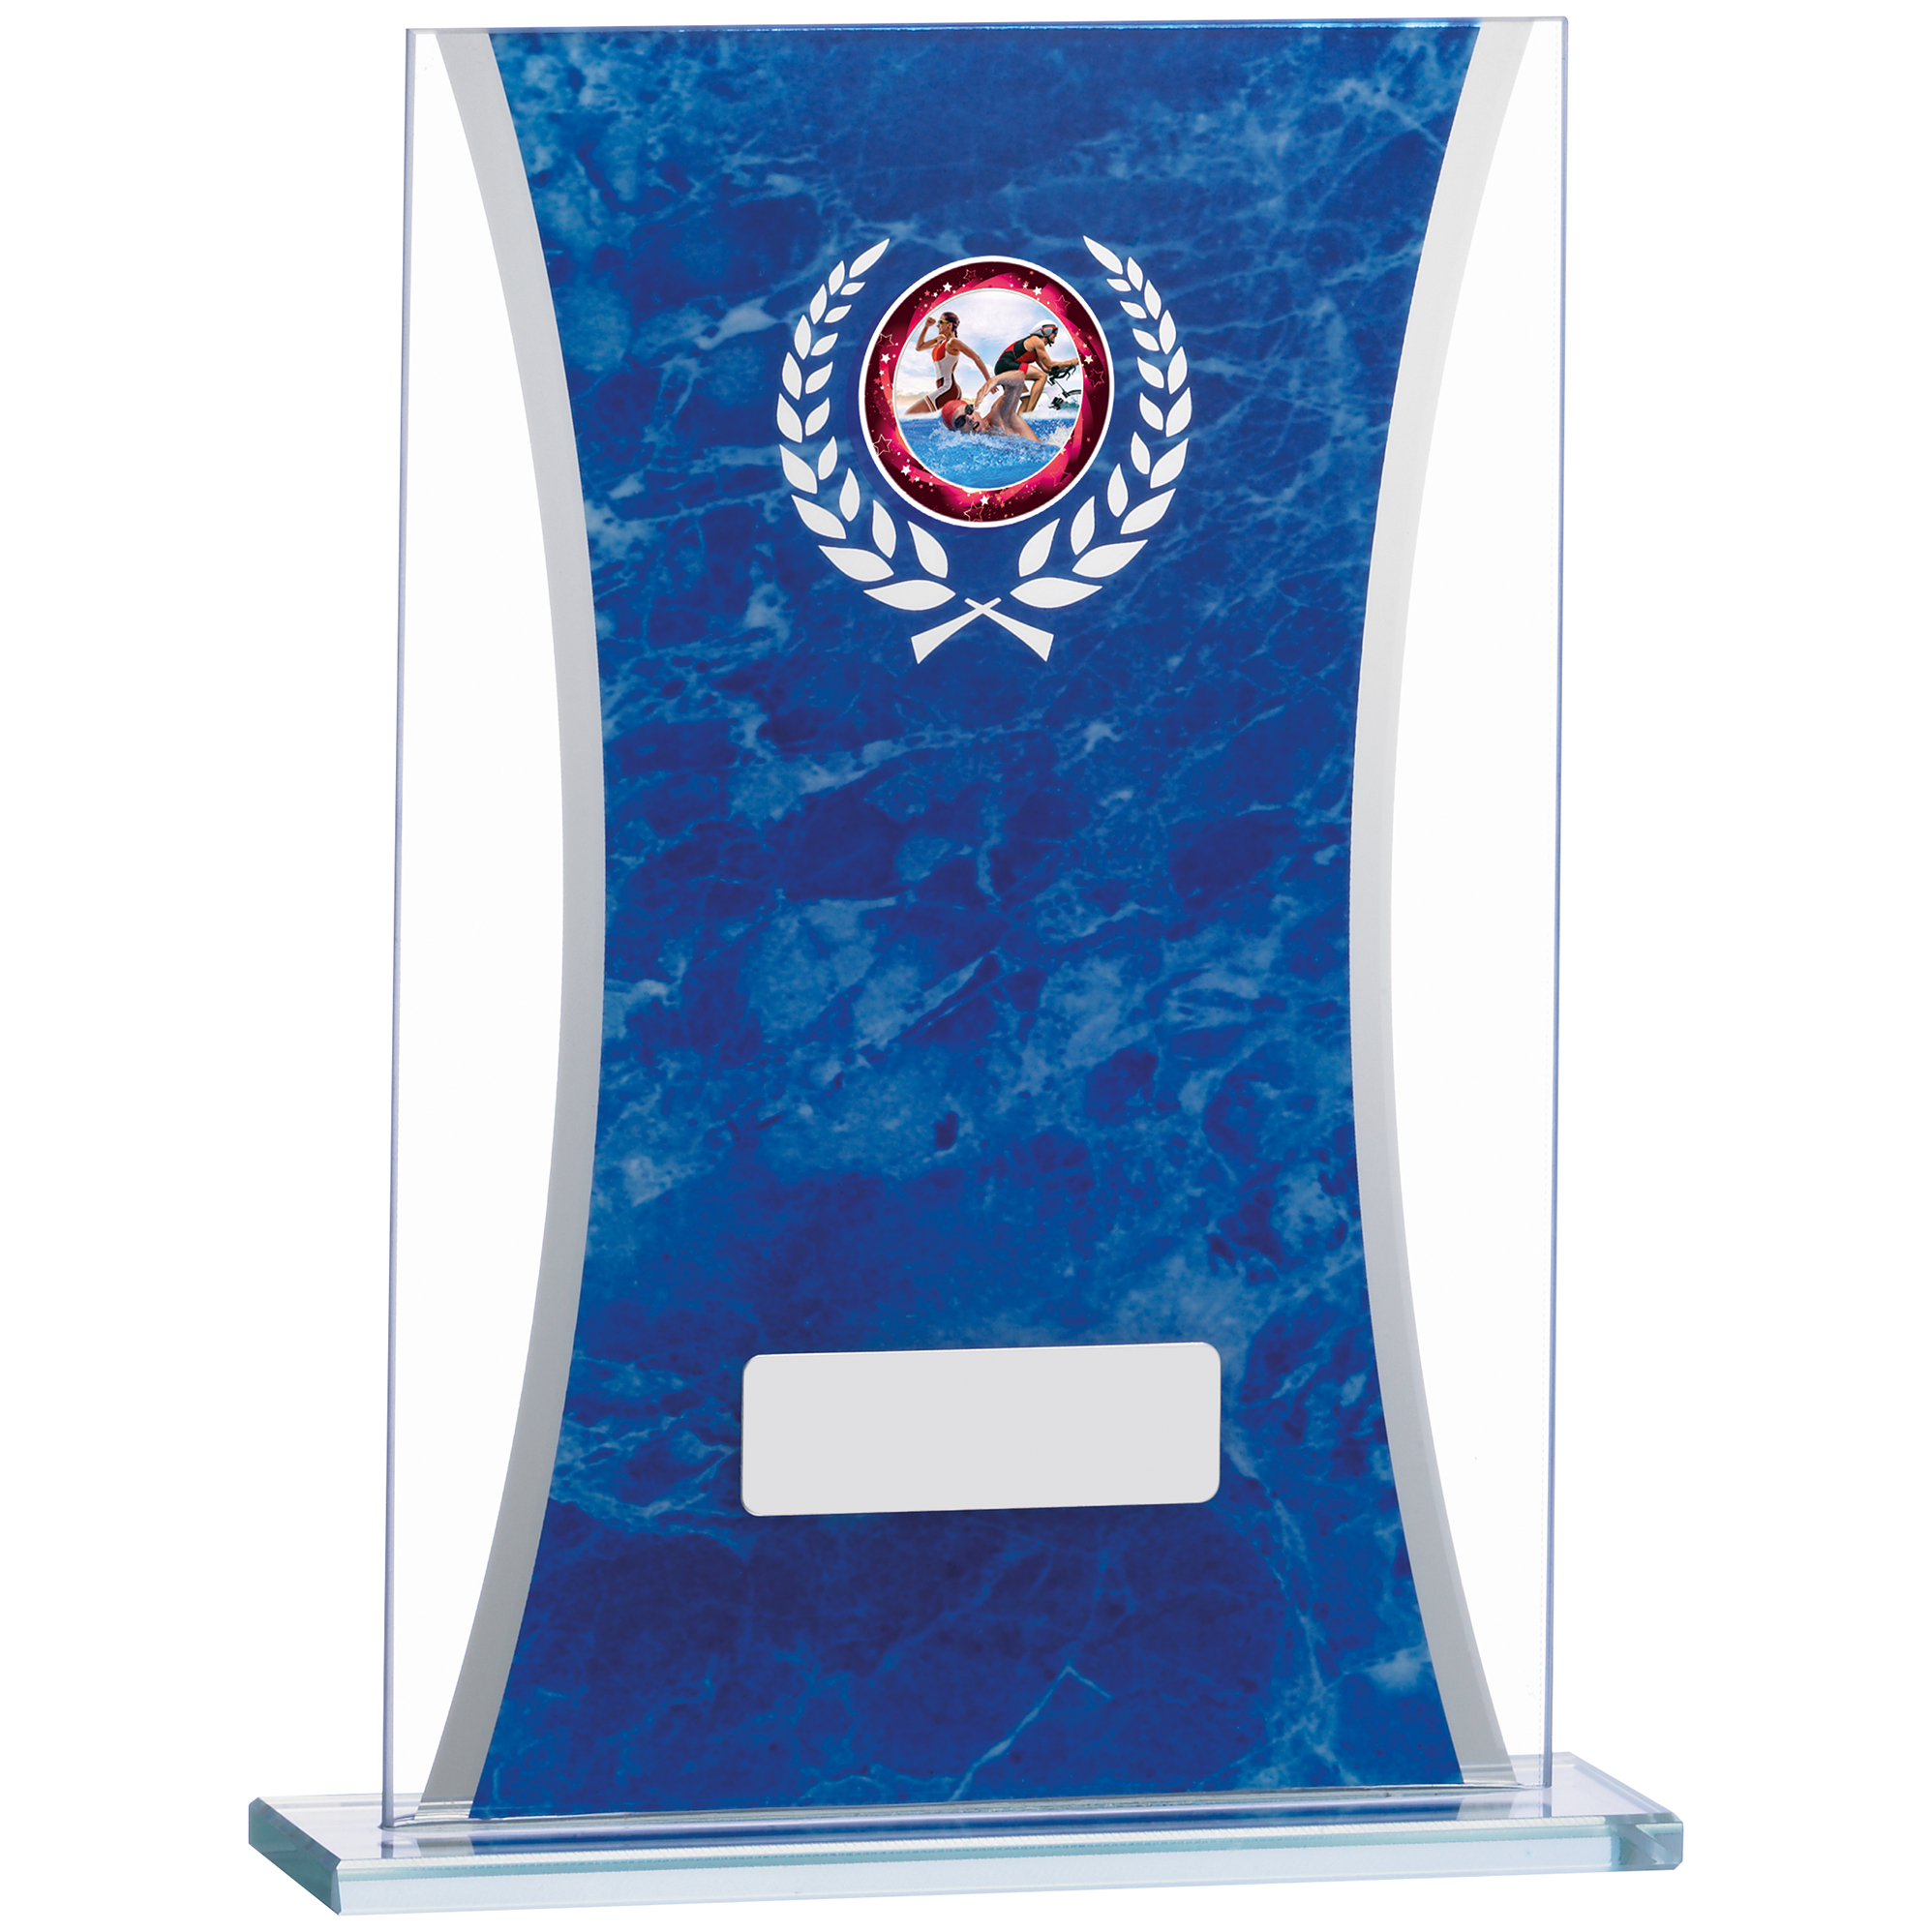 6.5'' BLUE MARBLE MIRRORED GLASS AWARD